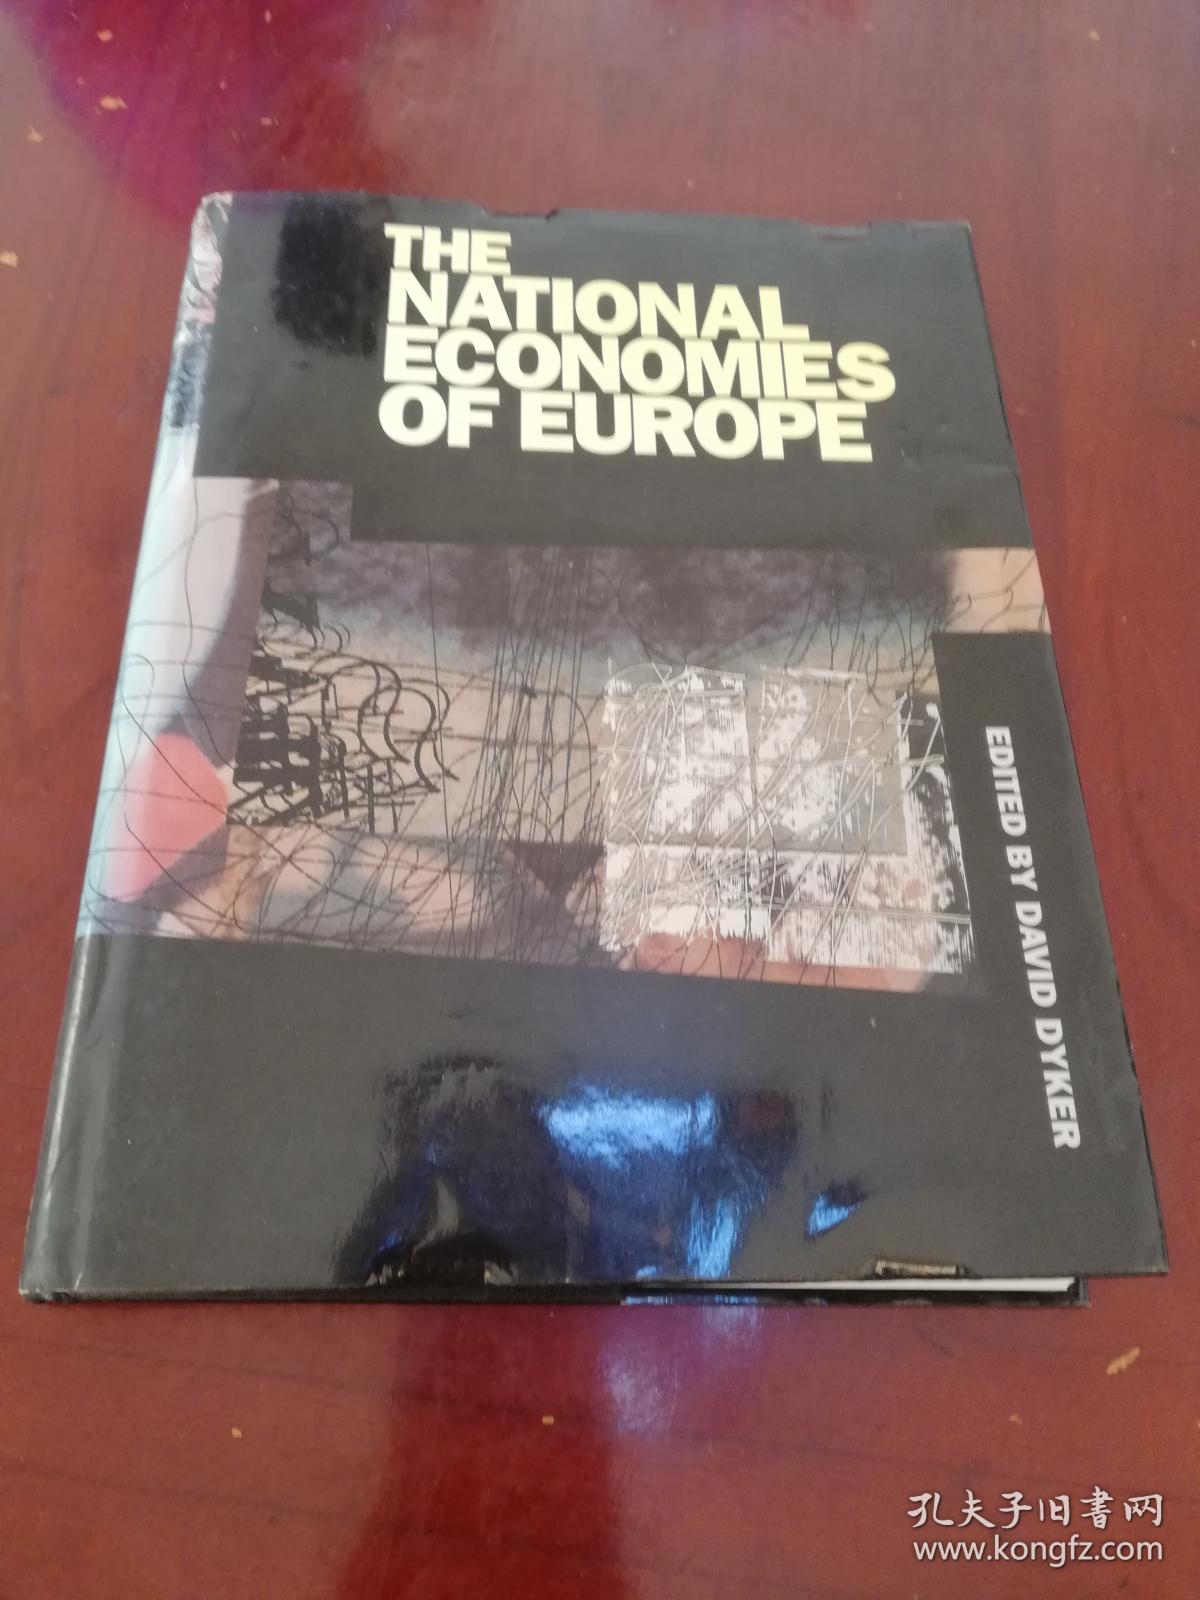 THE NATIONAL ECONOMIES OF EUROPE